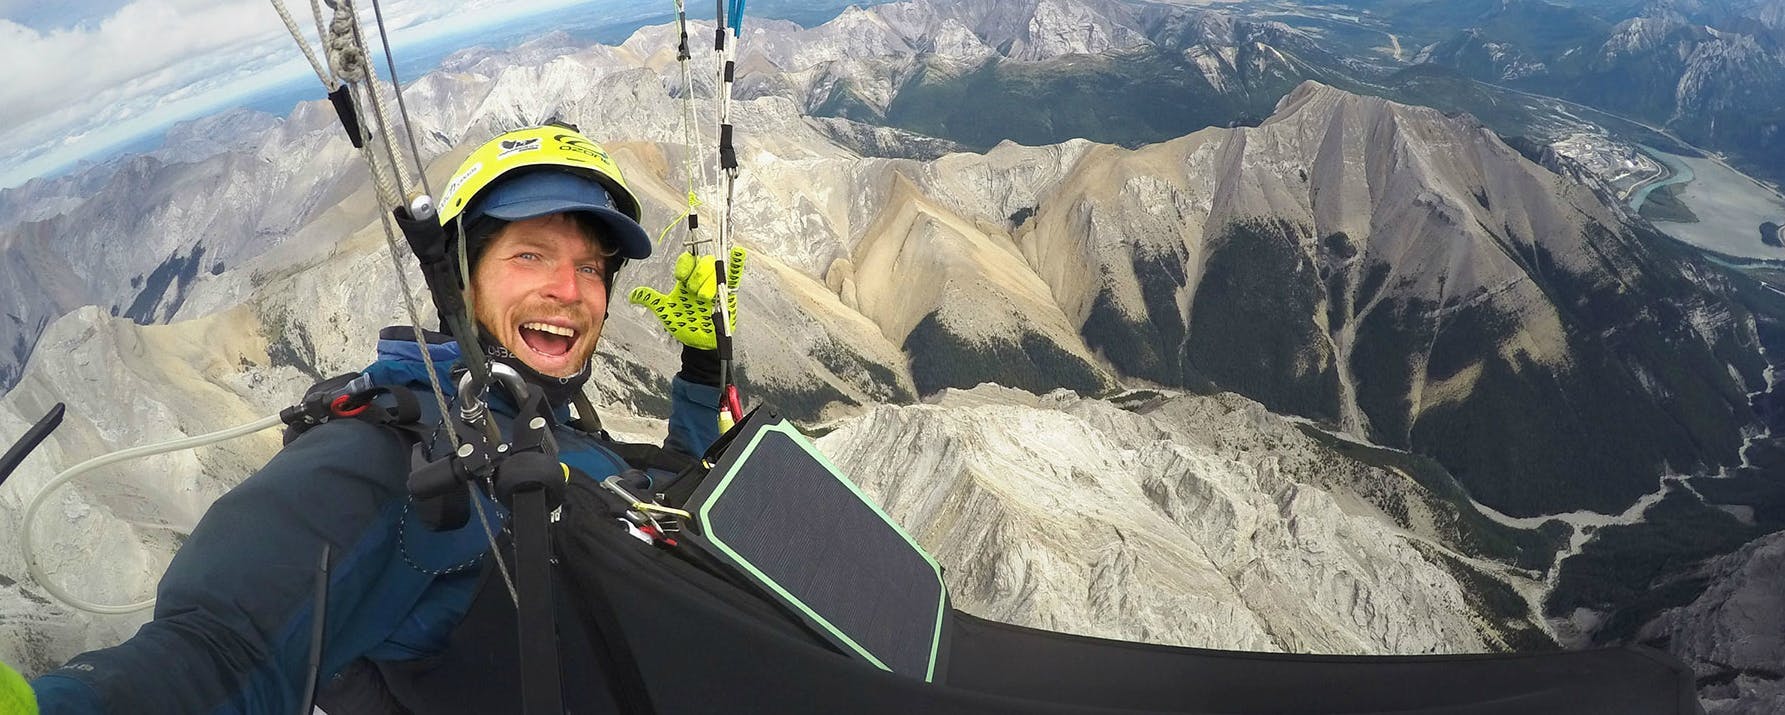 39 days in the air: paragliding from BC to Alberta